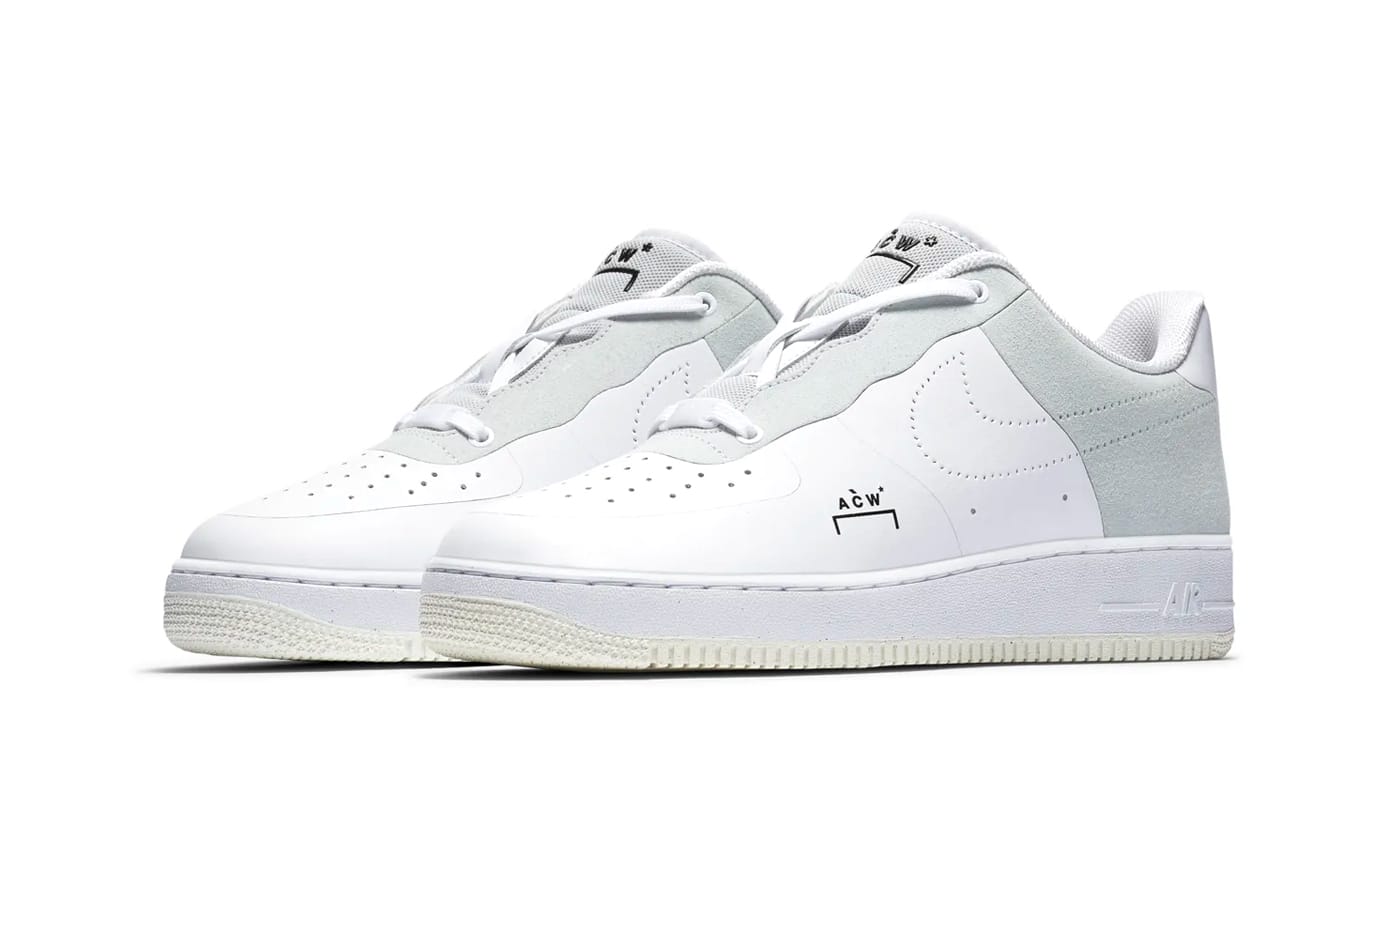 A-COLD-WALL* x Nike Air Force 1 Re 